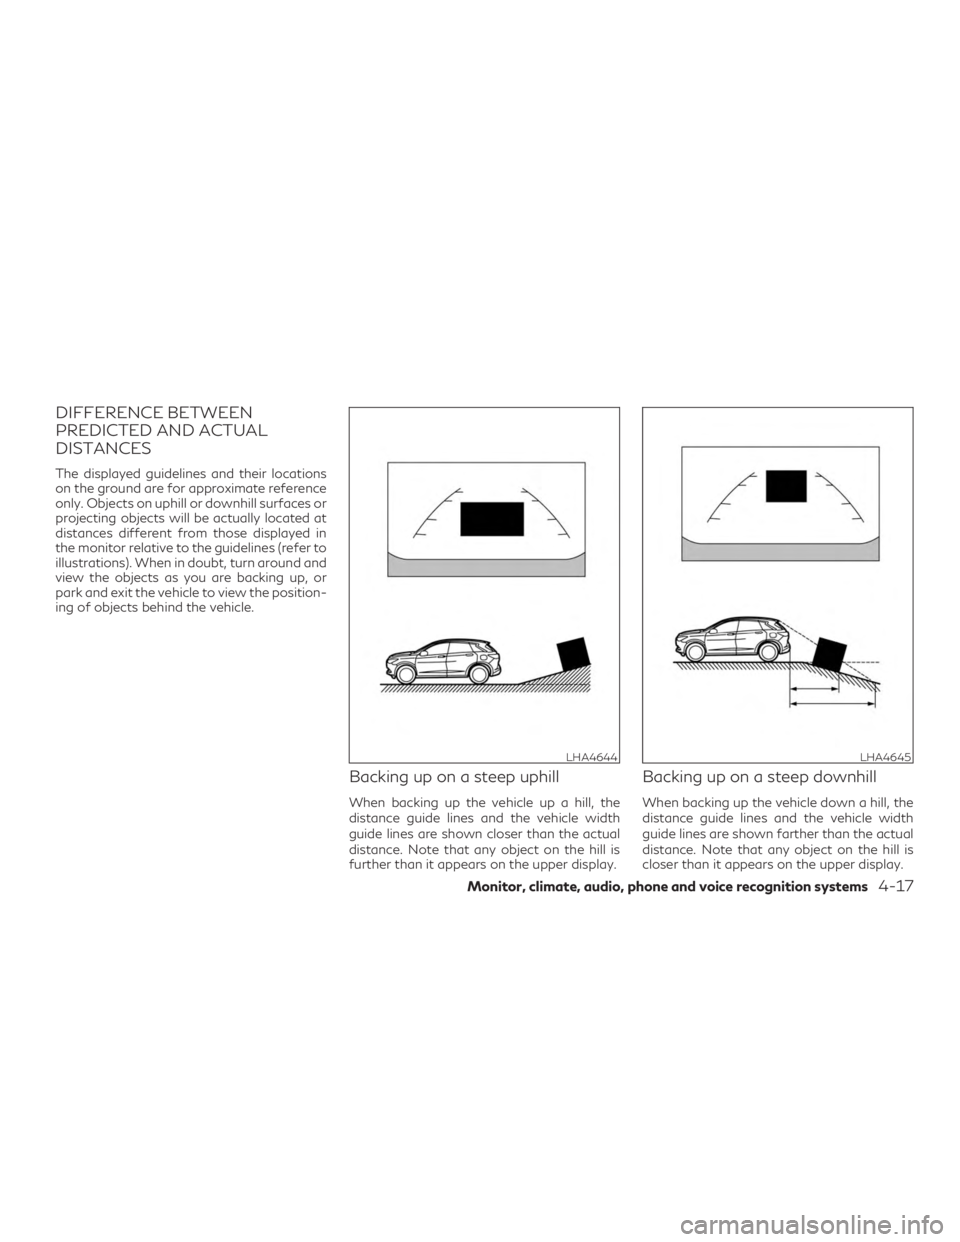 INFINITI QX50 2019  Owners Manual DIFFERENCE BETWEEN
PREDICTED AND ACTUAL
DISTANCES
The displayed guidelines and their locations
on the ground are for approximate reference
only. Objects on uphill or downhill surfaces or
projecting ob